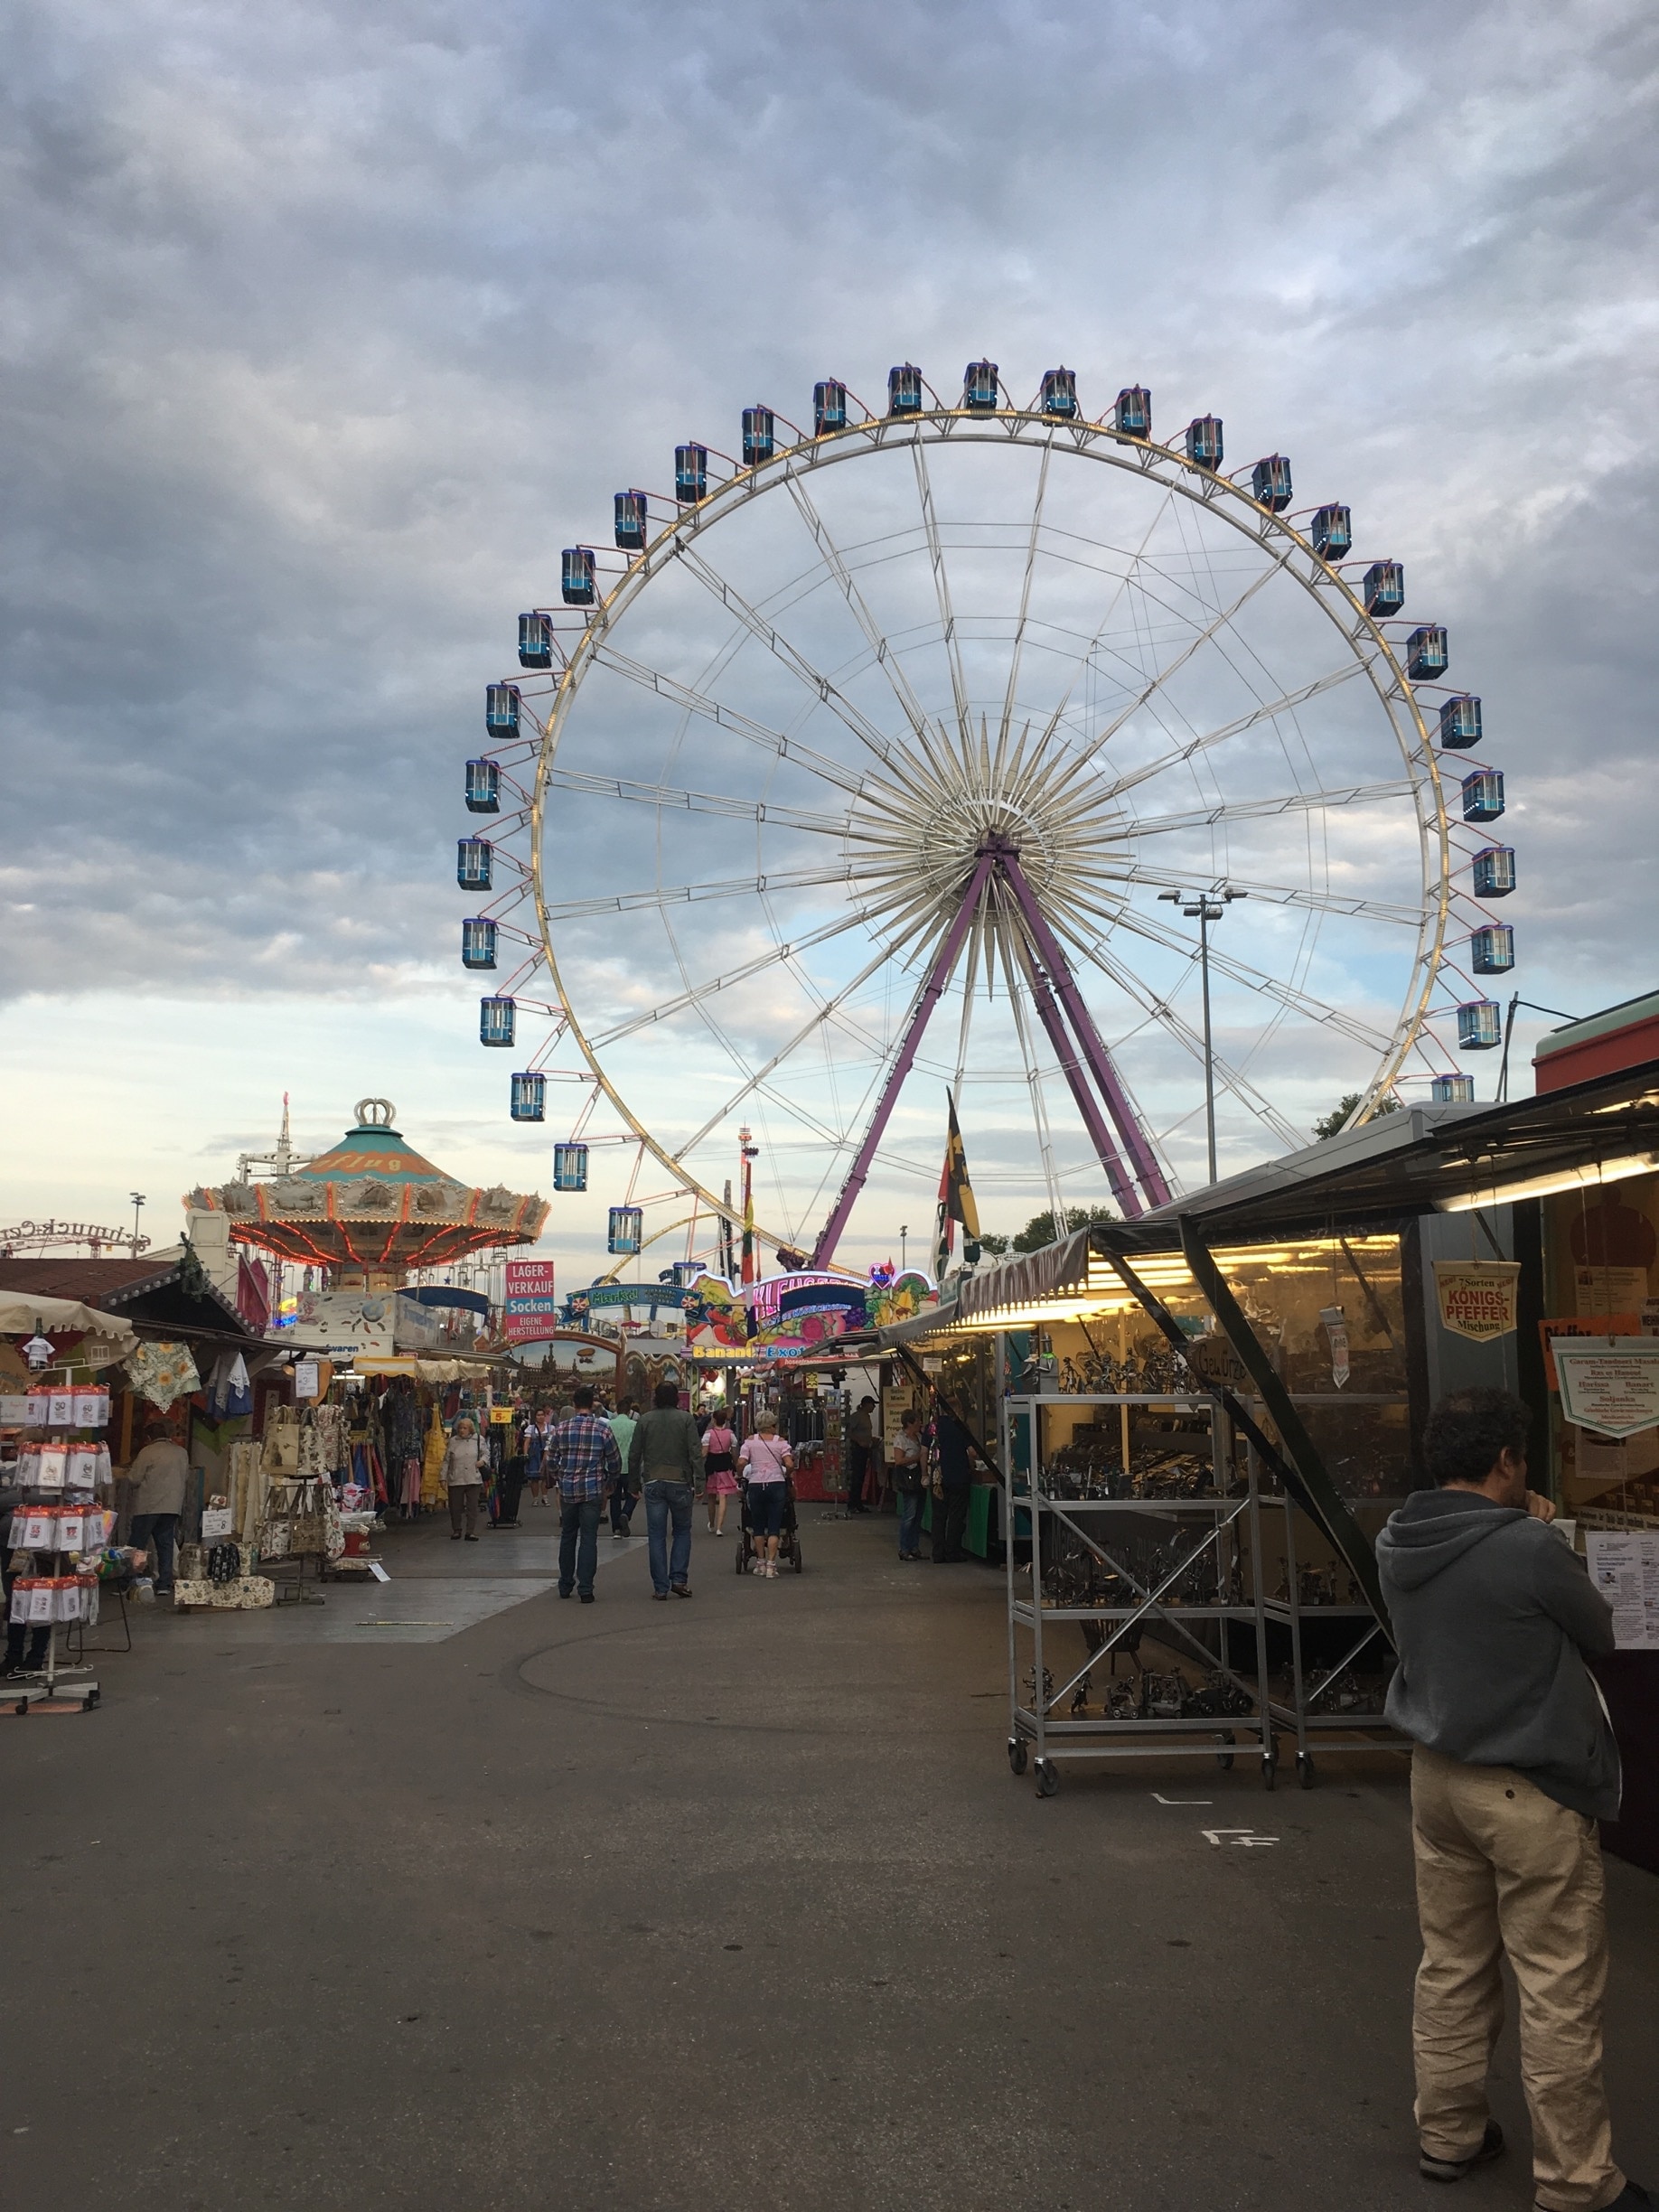 Volksfest in Stuttgart, the less touristy and way more fun Oktoberfest! Get a bunch of friends together and rent a table for the night for the most awesome experience.